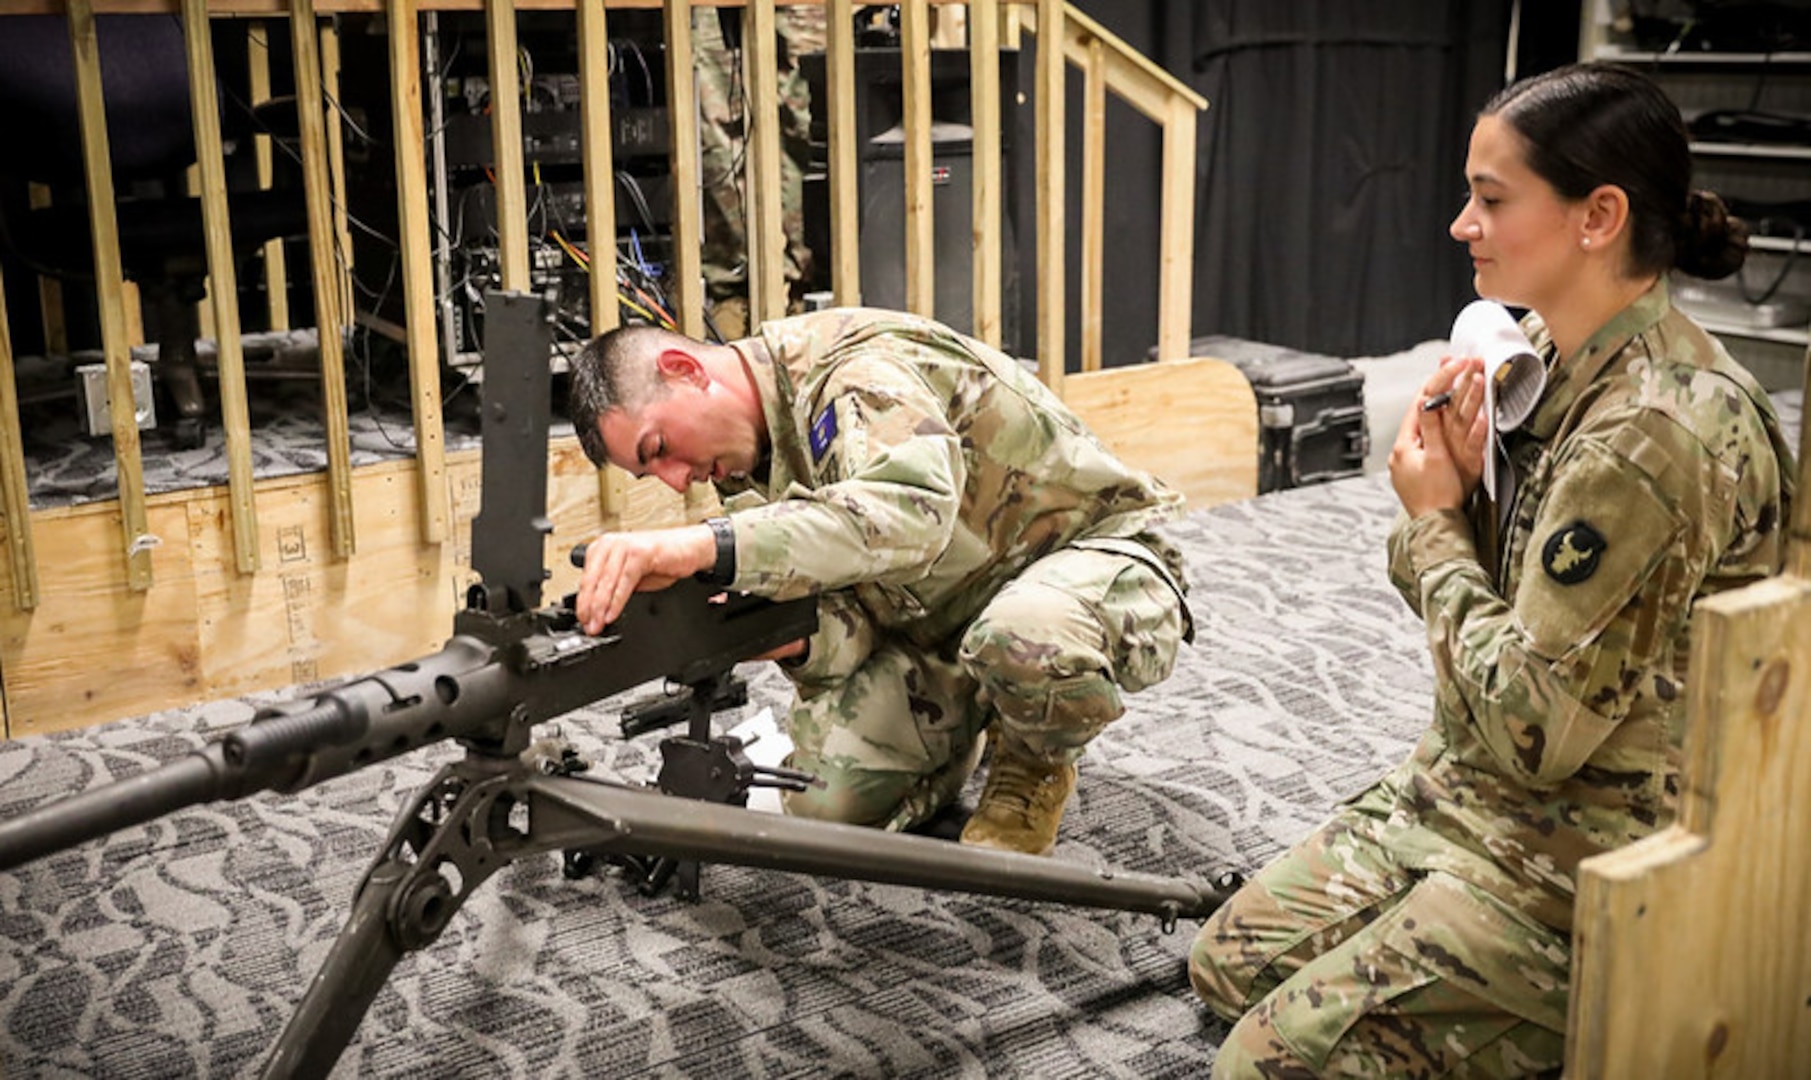 Staff Sgt. Alexander Kilbane, from the Wisconsin Army National Guard’s Headquarters Detachment, 2nd Battalion, 426th Regional Training Institute, reassembles an M2 50-cal crew-served weapon May 4 during the 2024 Region IV Best Warrior Competition at Camp Dodge, Iowa. Kilbane’s fellow competitor, Spc. Tevin Kenton of the 105th Cavalry Regiment, took first place in the lower enlisted division and will represent Wisconsin at the national Best Warrior Competition this August in Vermont. 135th Mobile Public Affairs Detachment photo